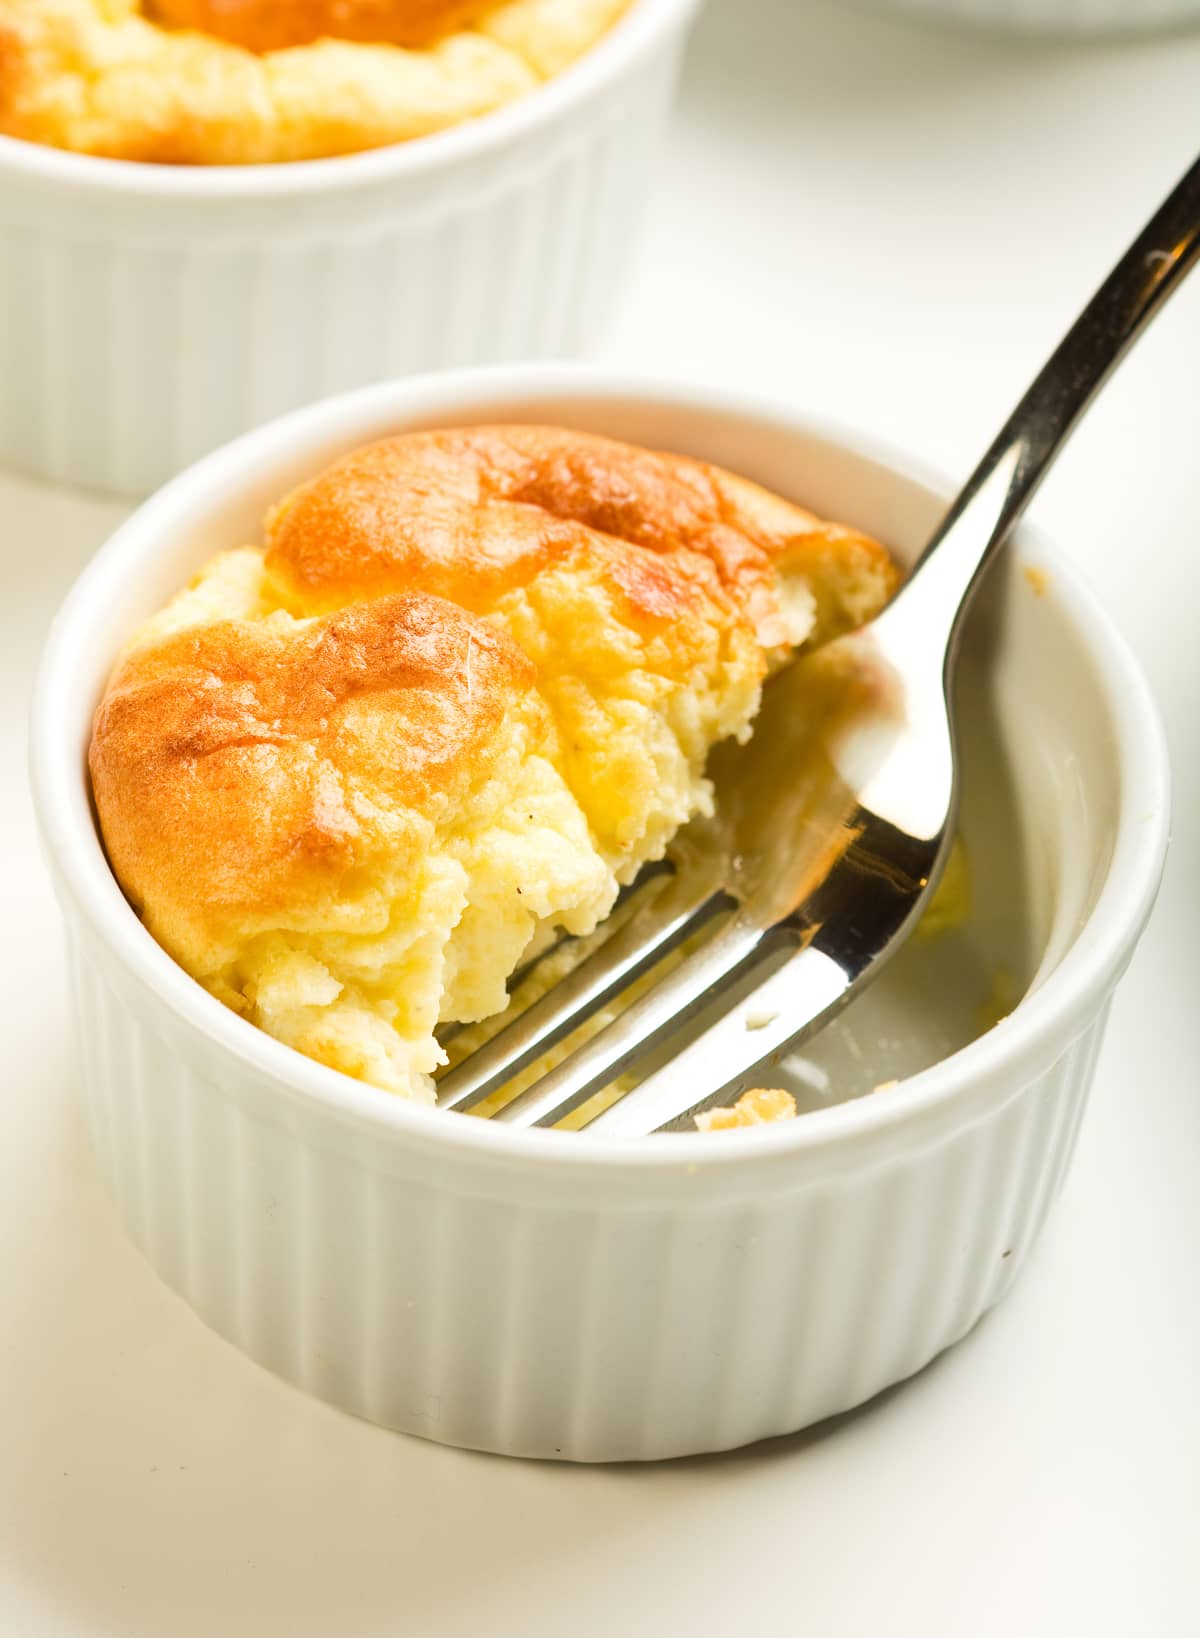 Half eaten souffle with fork